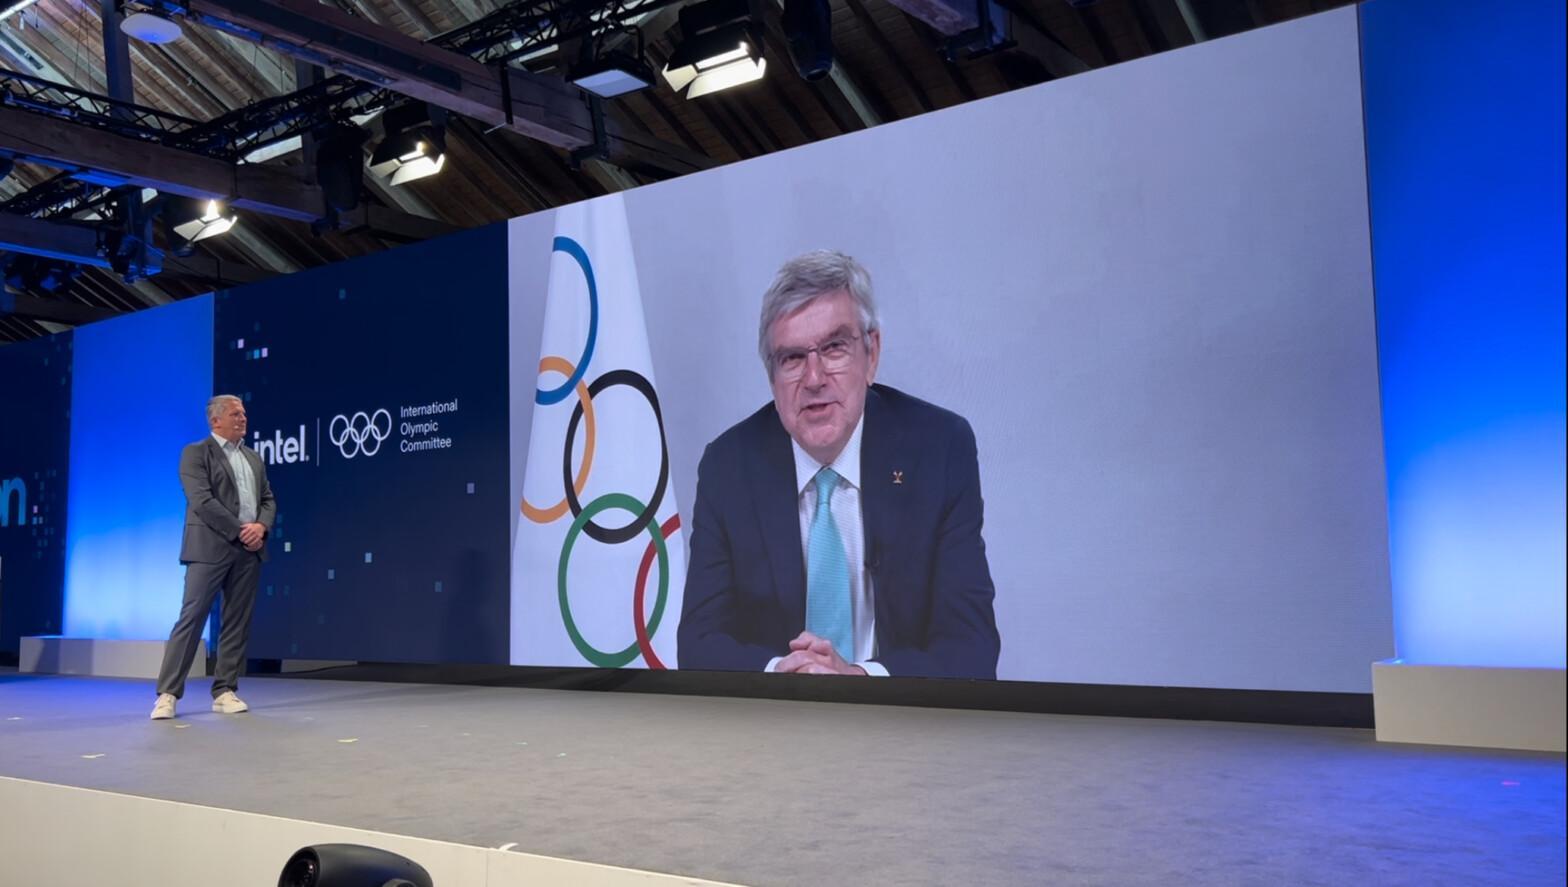 Christoph Schell interviewing Thomas Bach